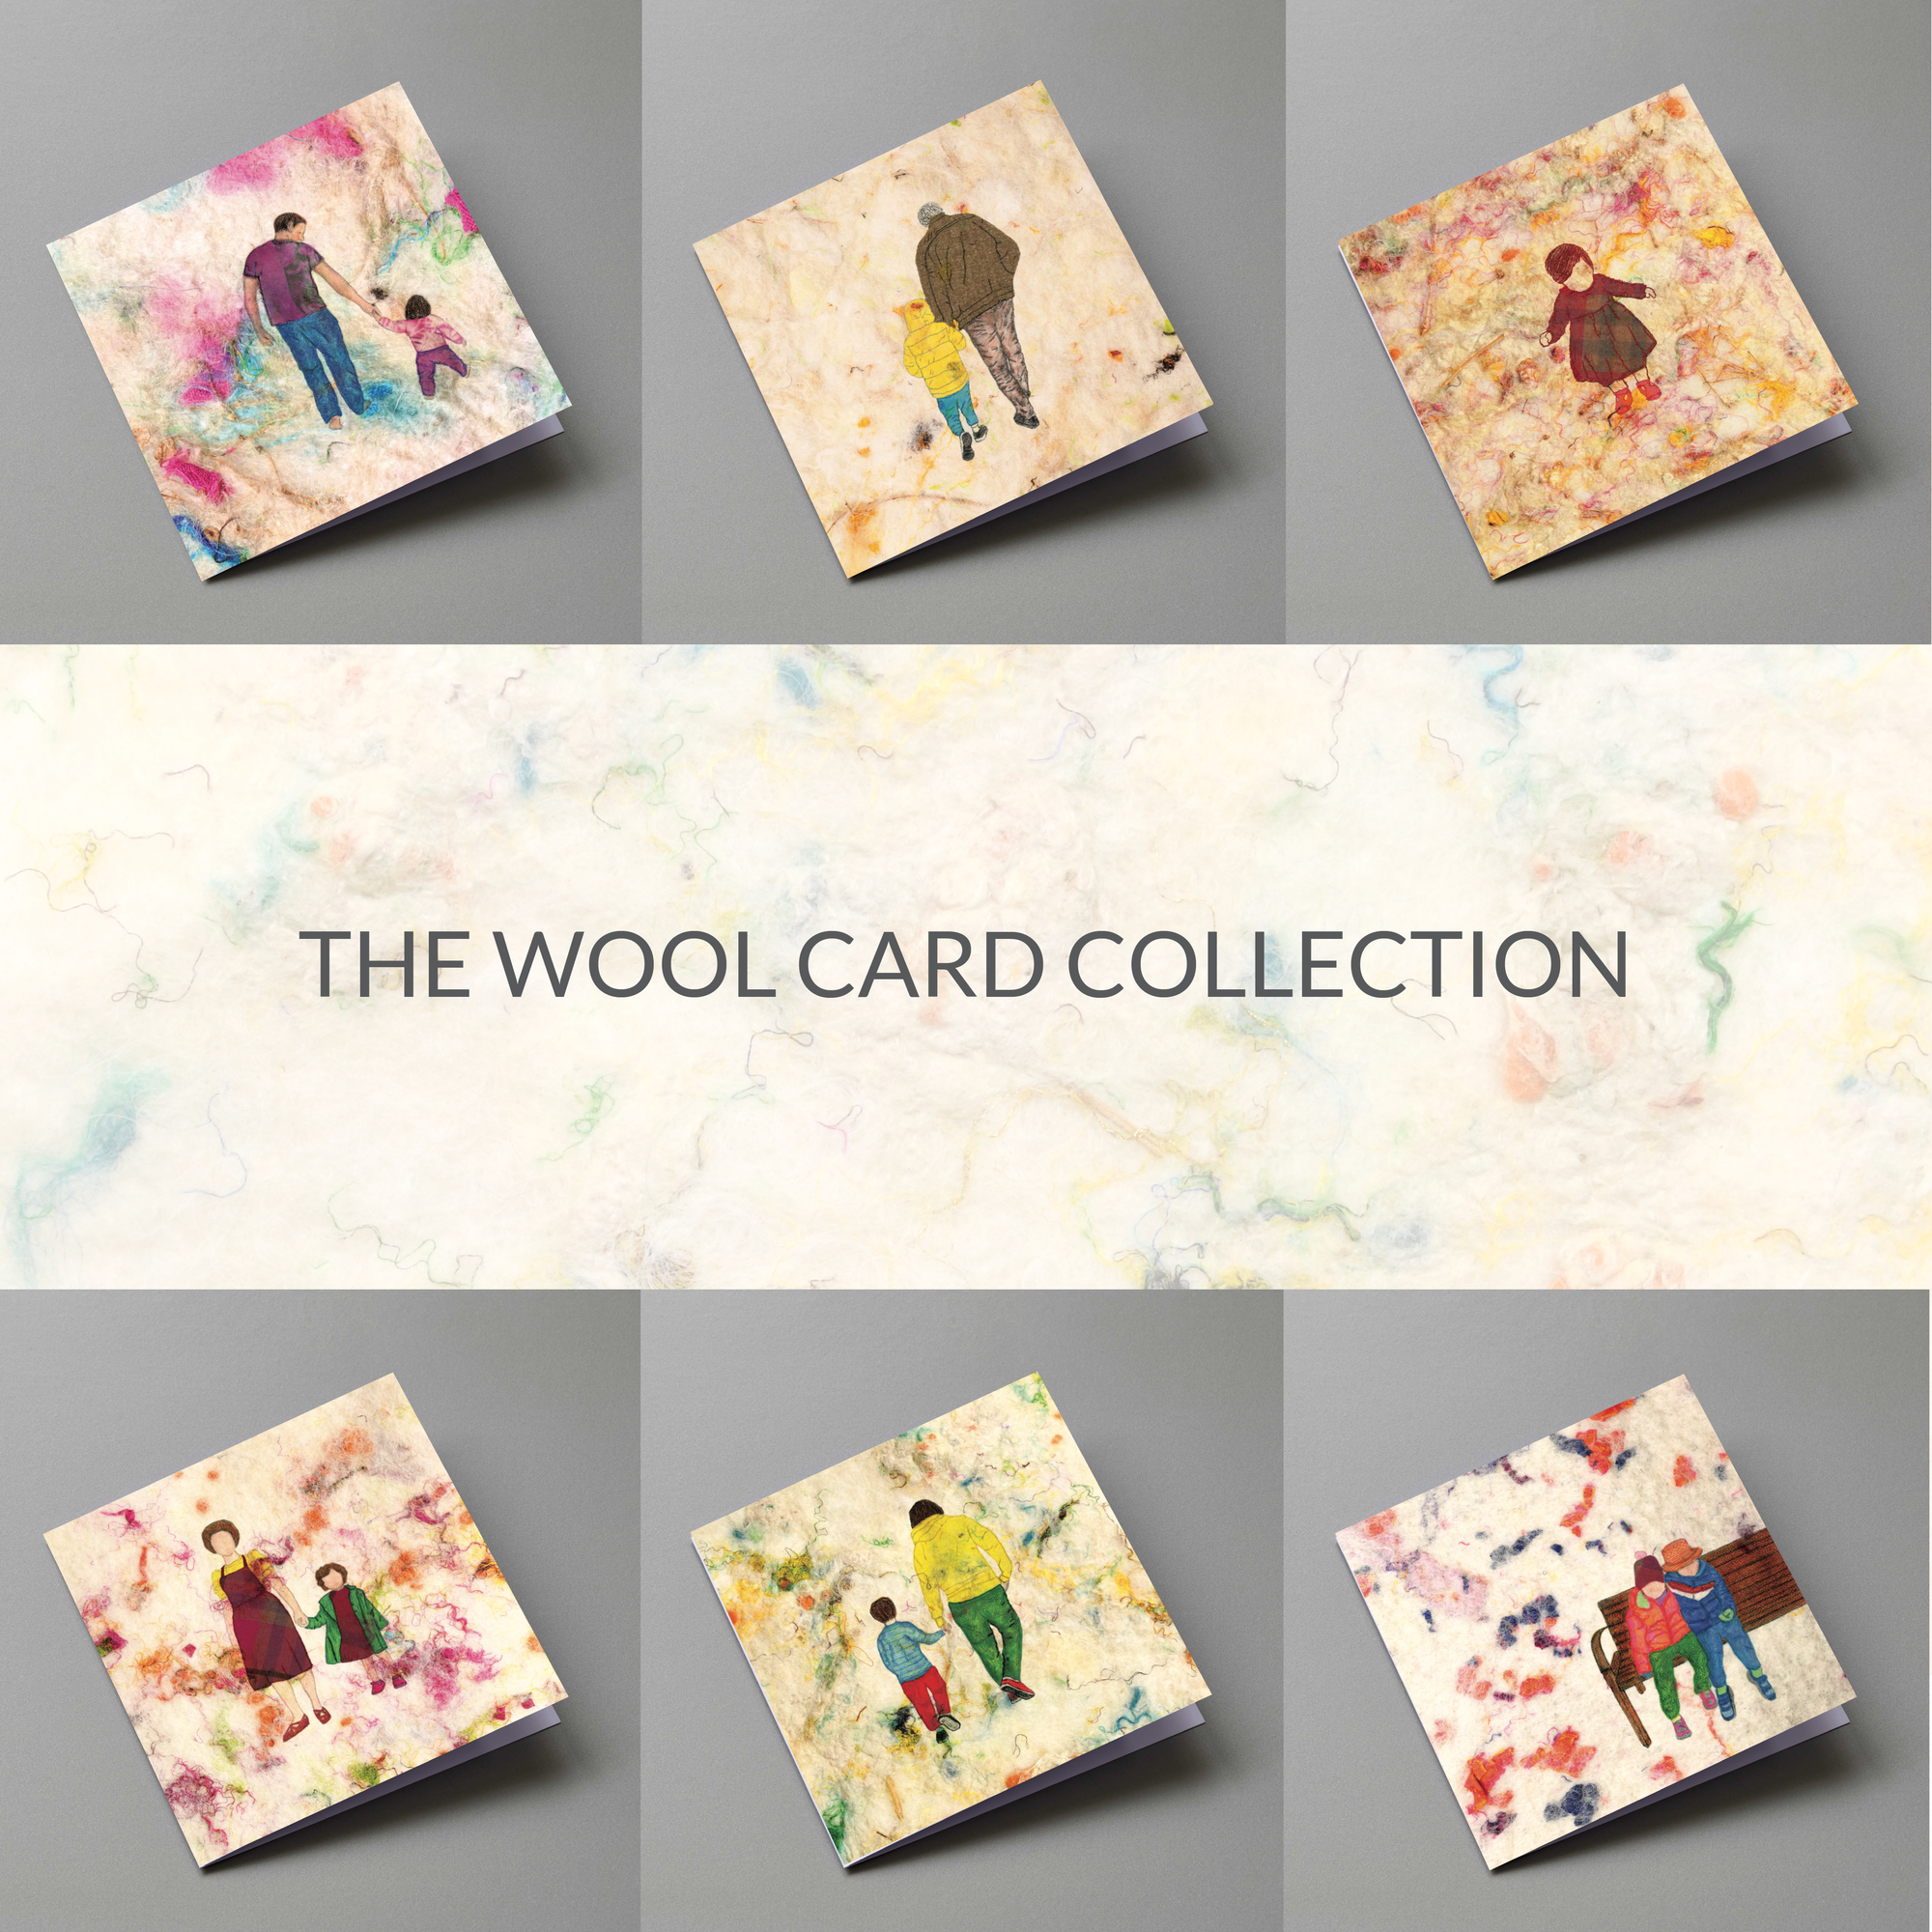 The Wool Card Collection